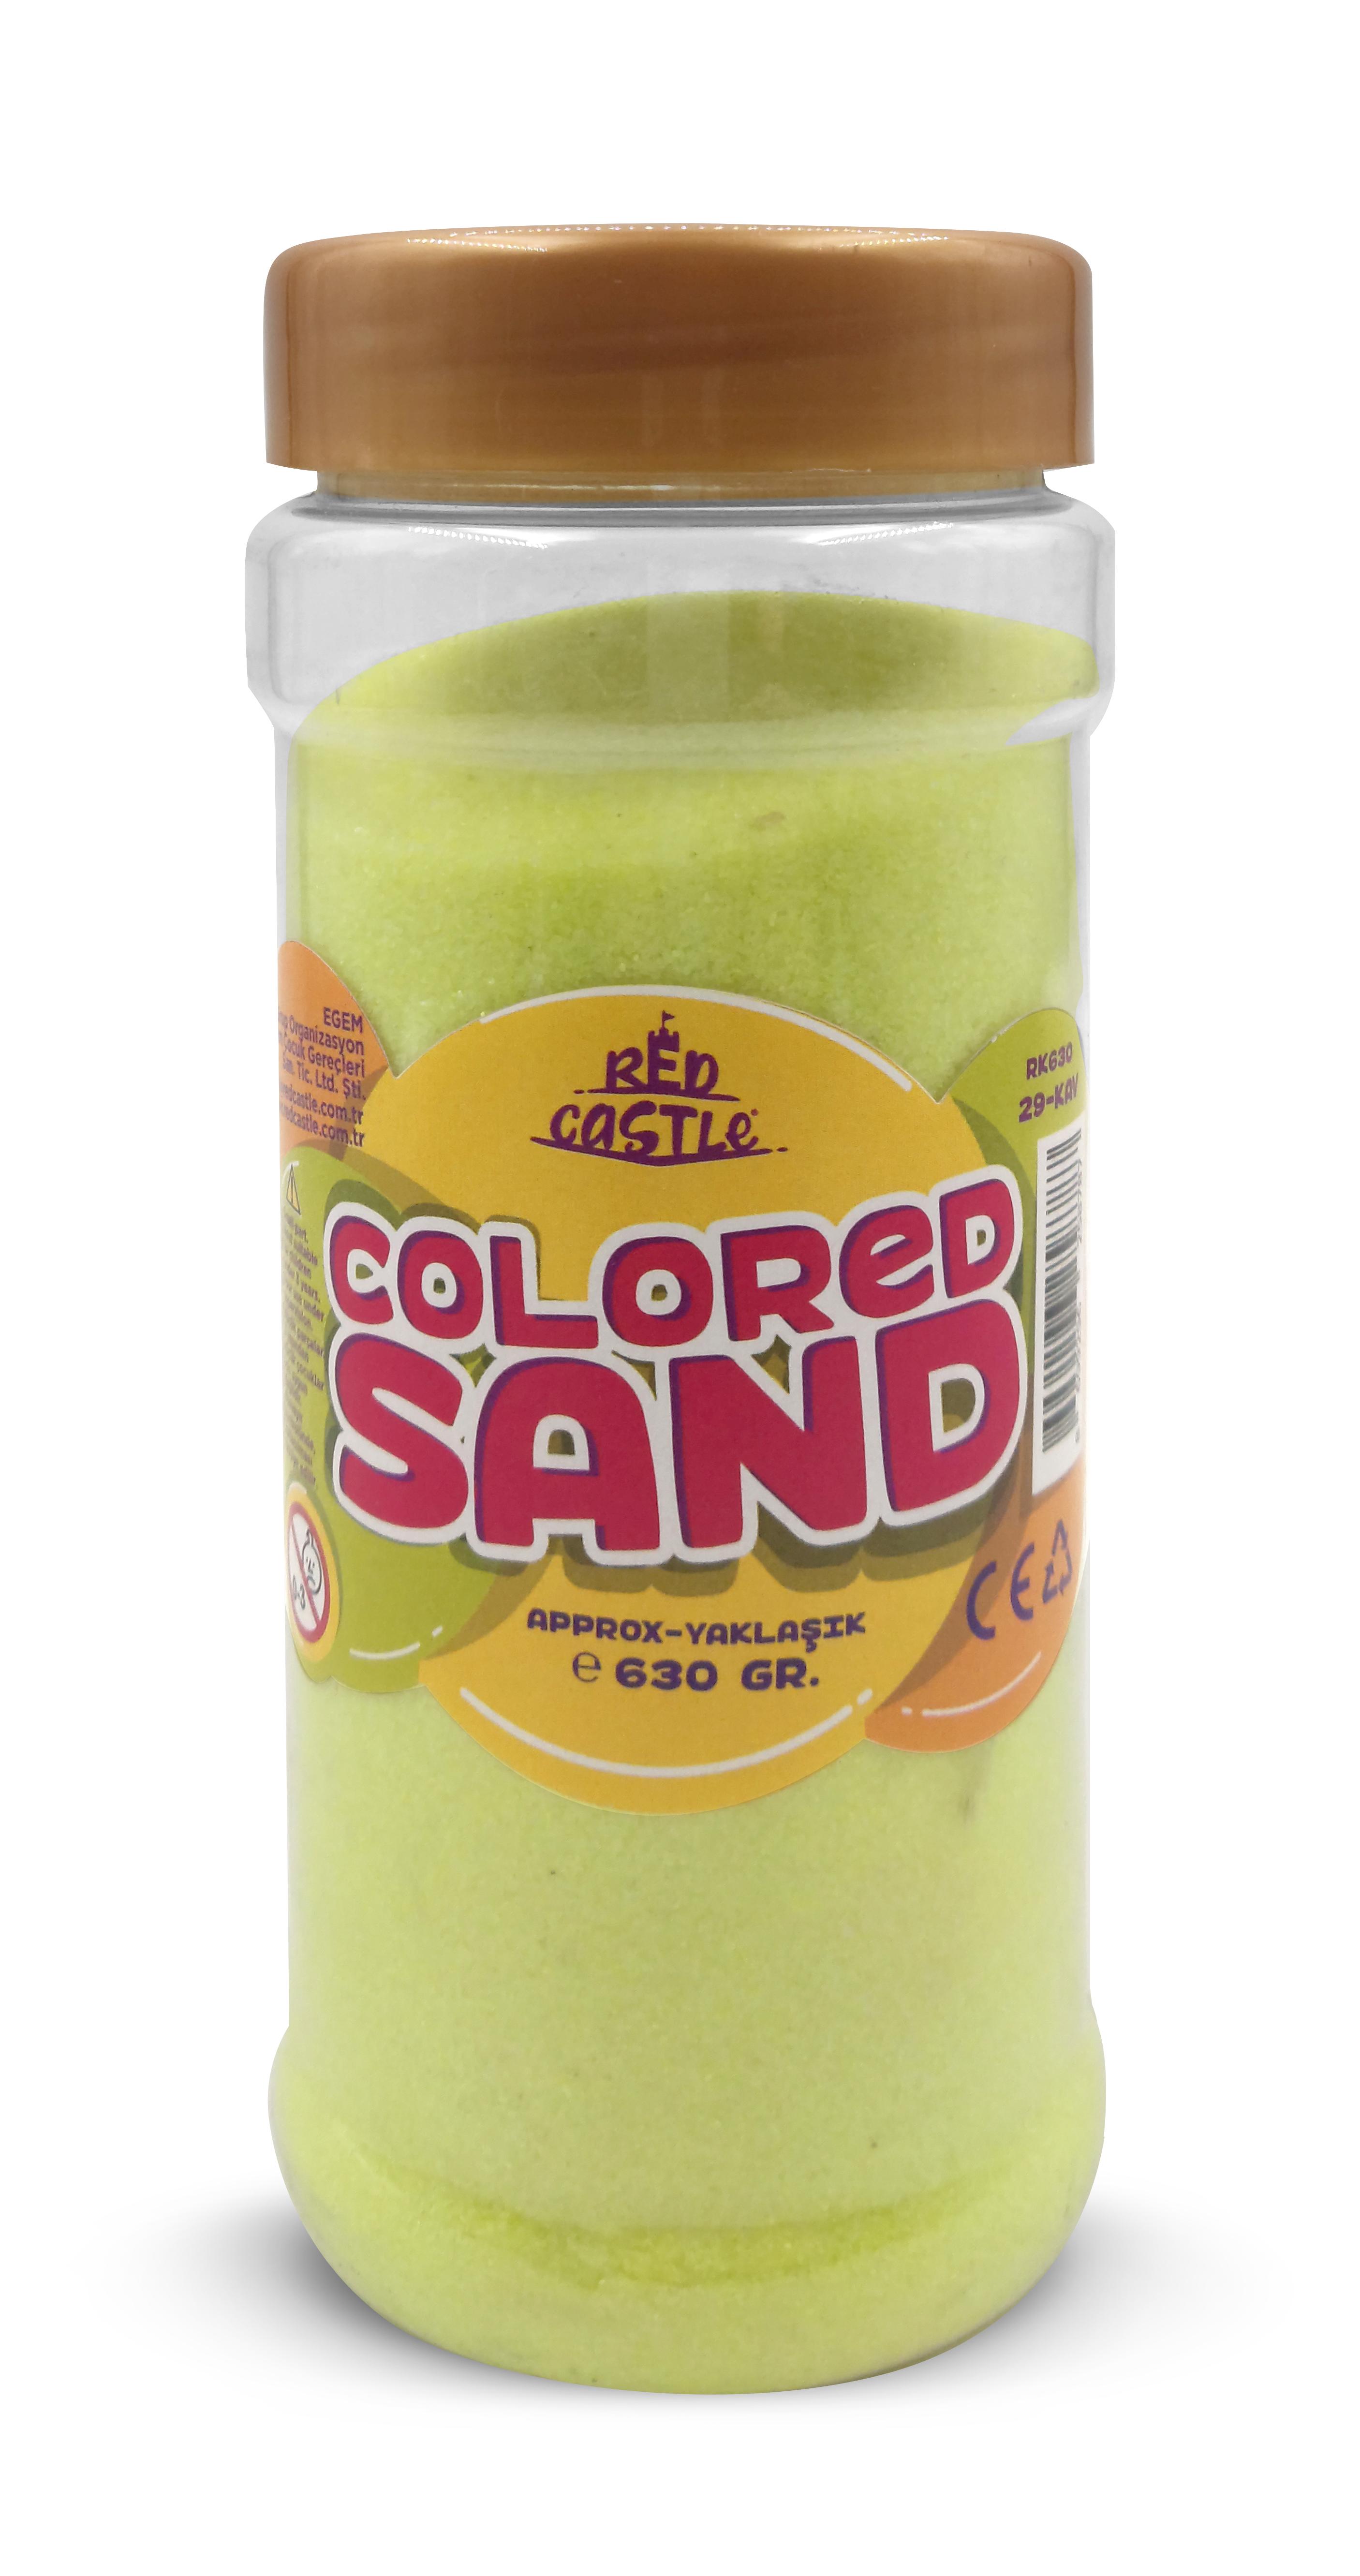 Colored Sand Painting Sand 630 grams-Red Castle RK630-29-KAV